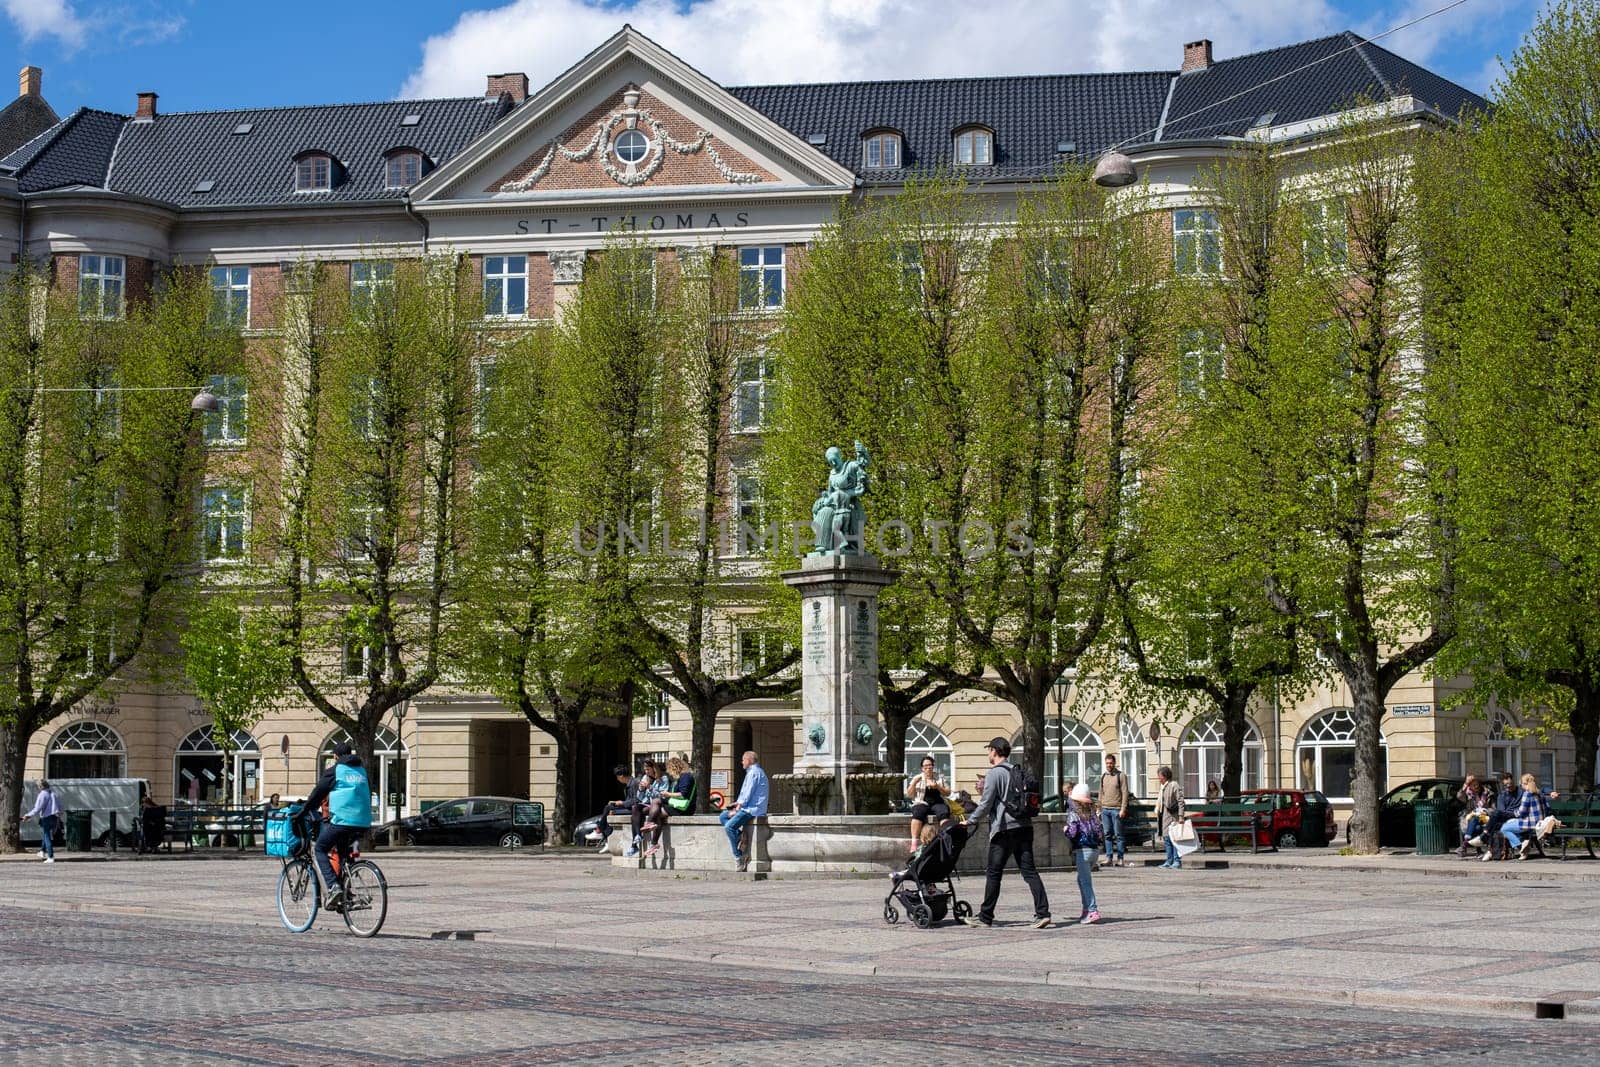 Frederiksberg, Denmark - May 7, 2022: Historic fountain and people on Sankt Thomas Plaza.